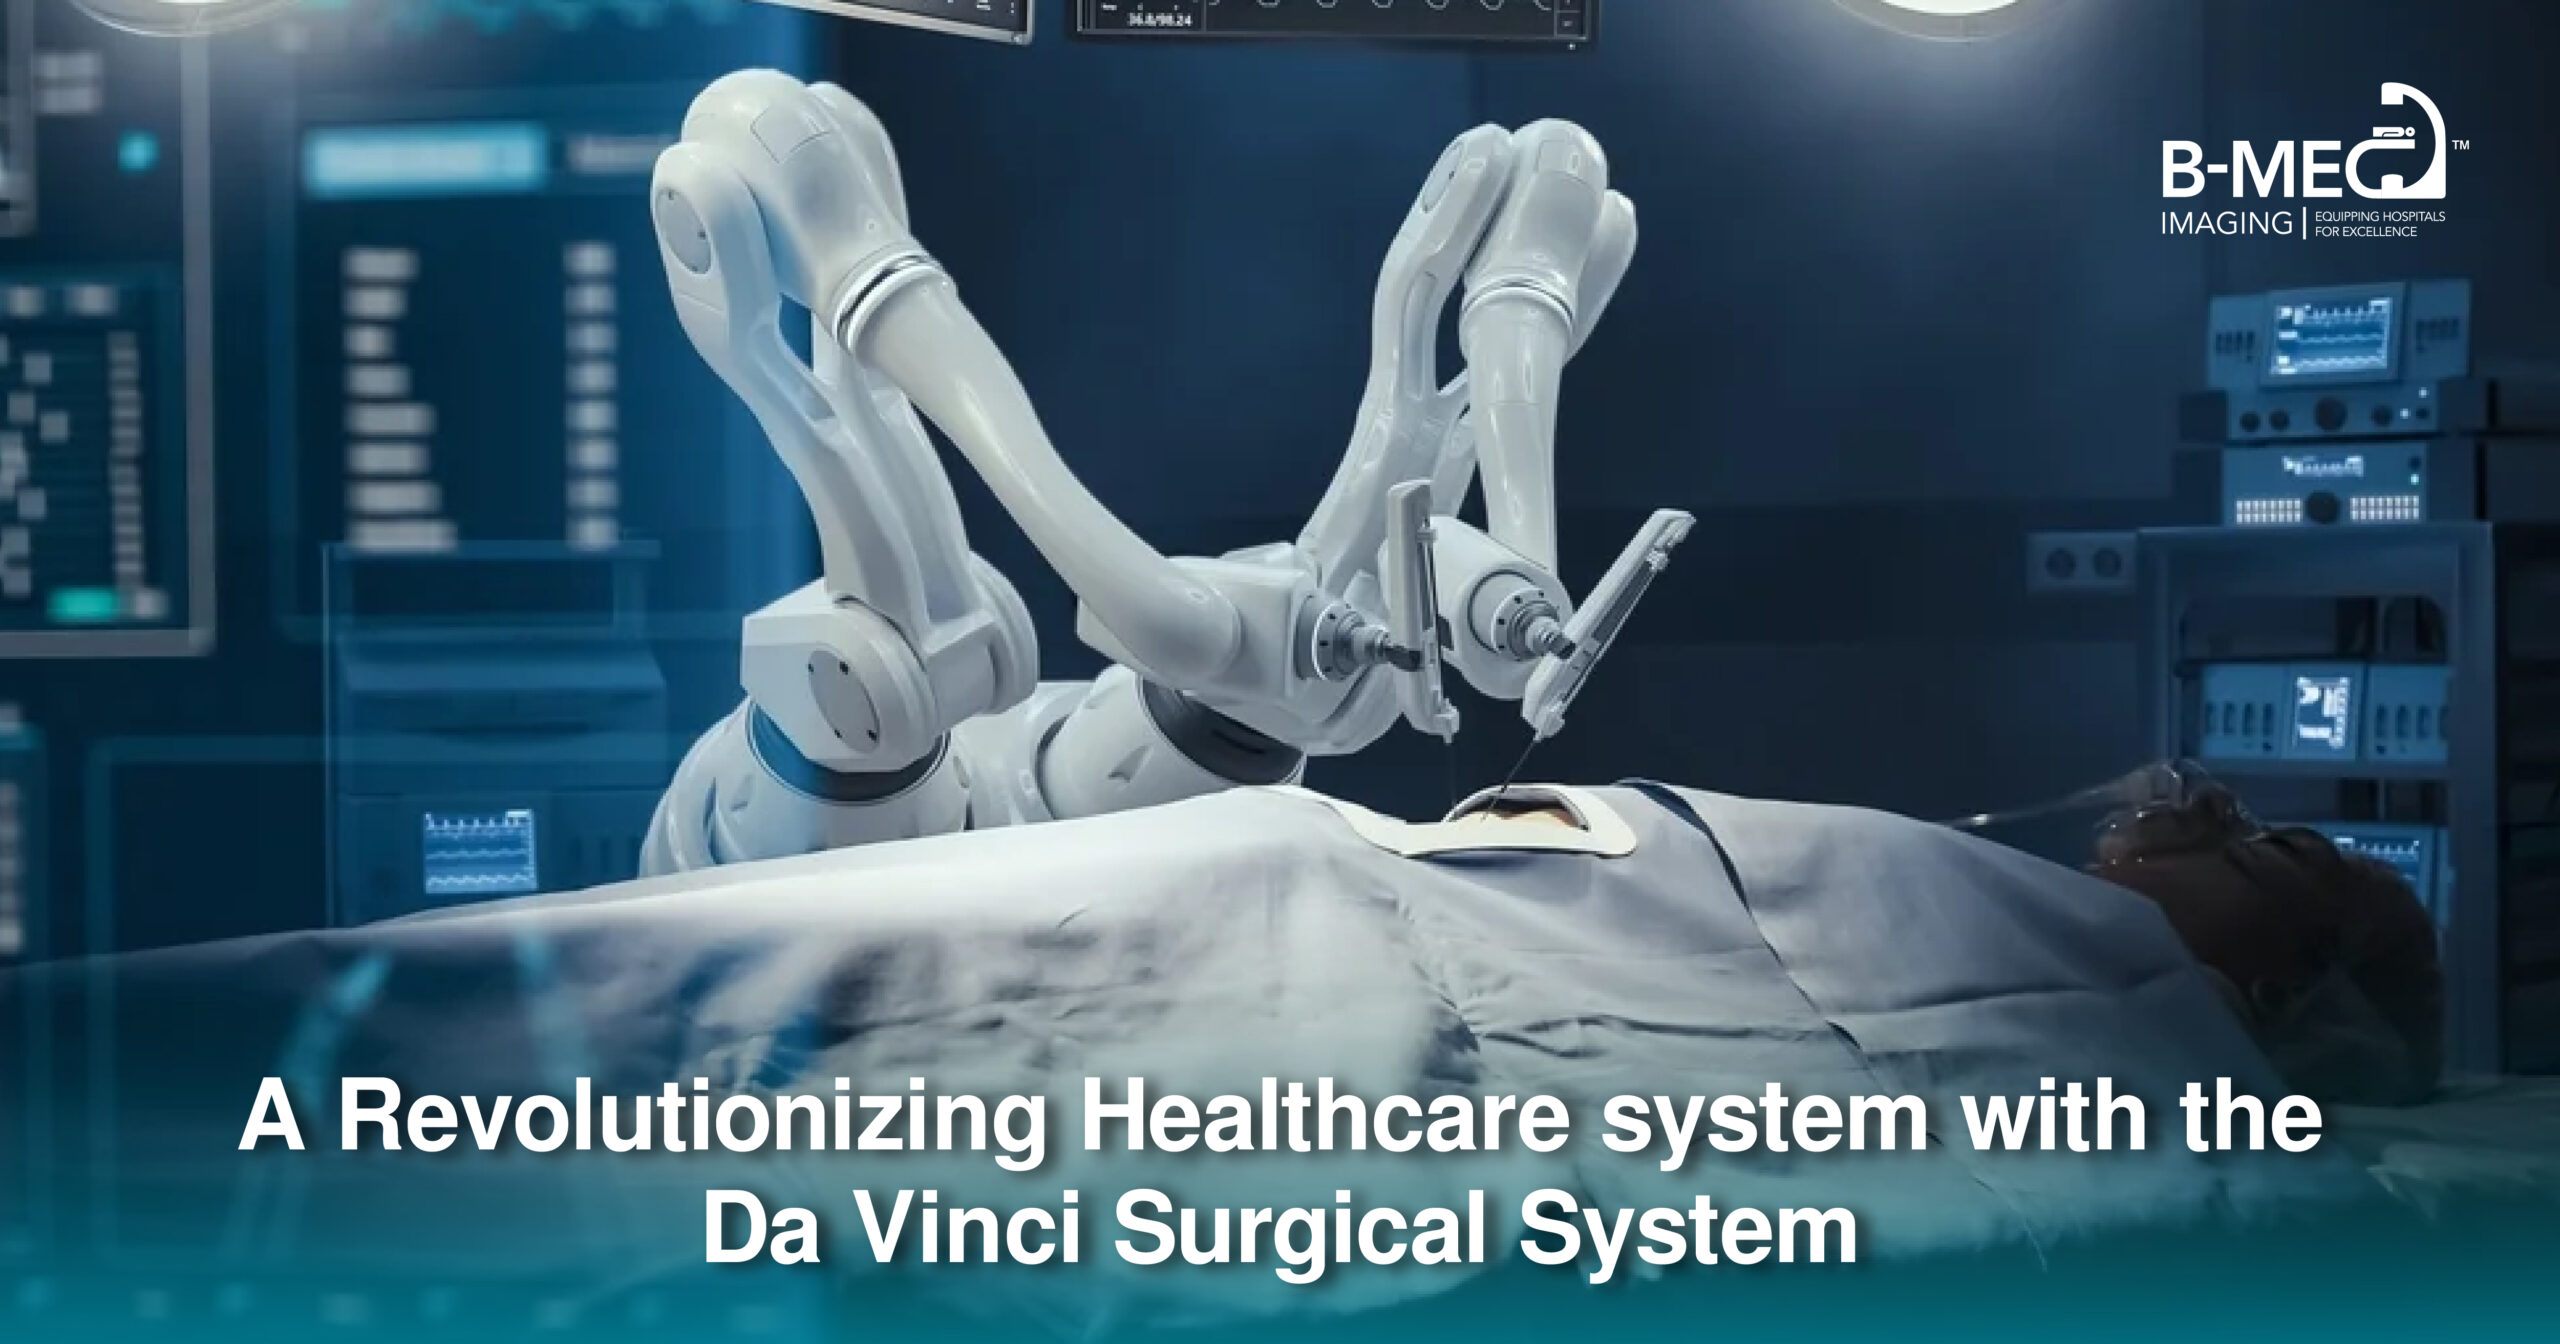 You are currently viewing The Da Vinci Surgical System: A Phenomenal Healthcare Invention for a Tremendous Leap Forward in Robotics and Biomedical Engineering in the 21st Century